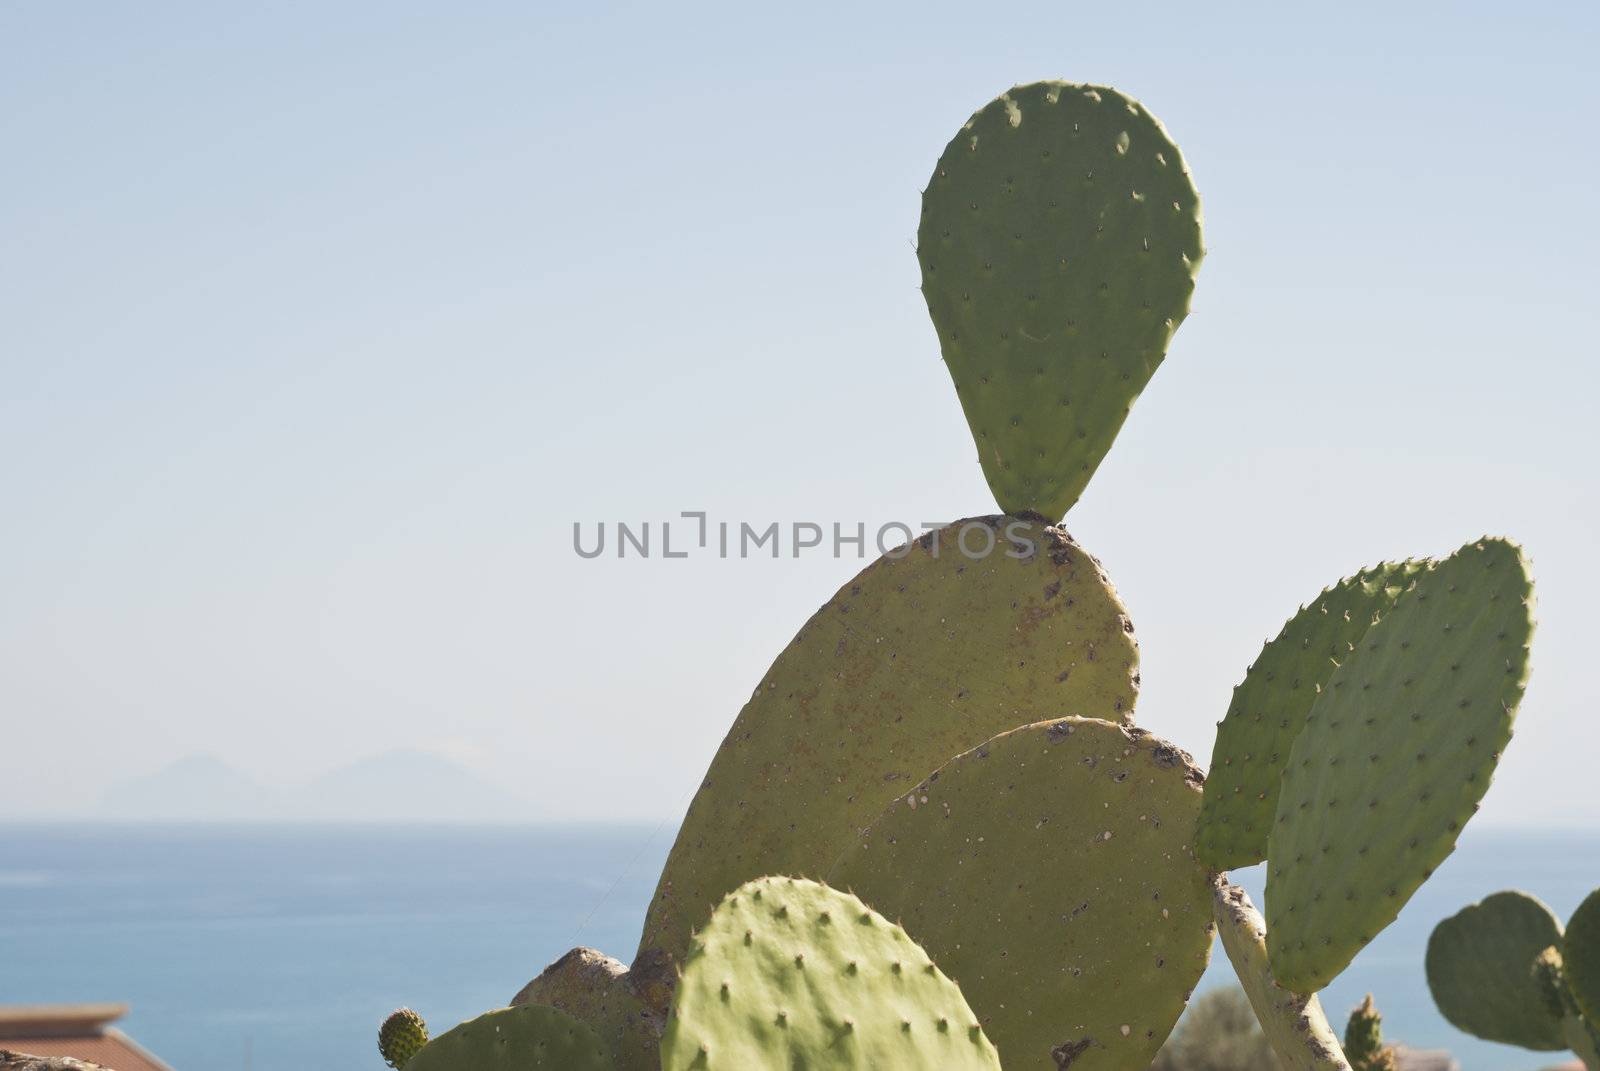 Prickly pear cactus plant and fruit and in the background the Aeolian Islands.